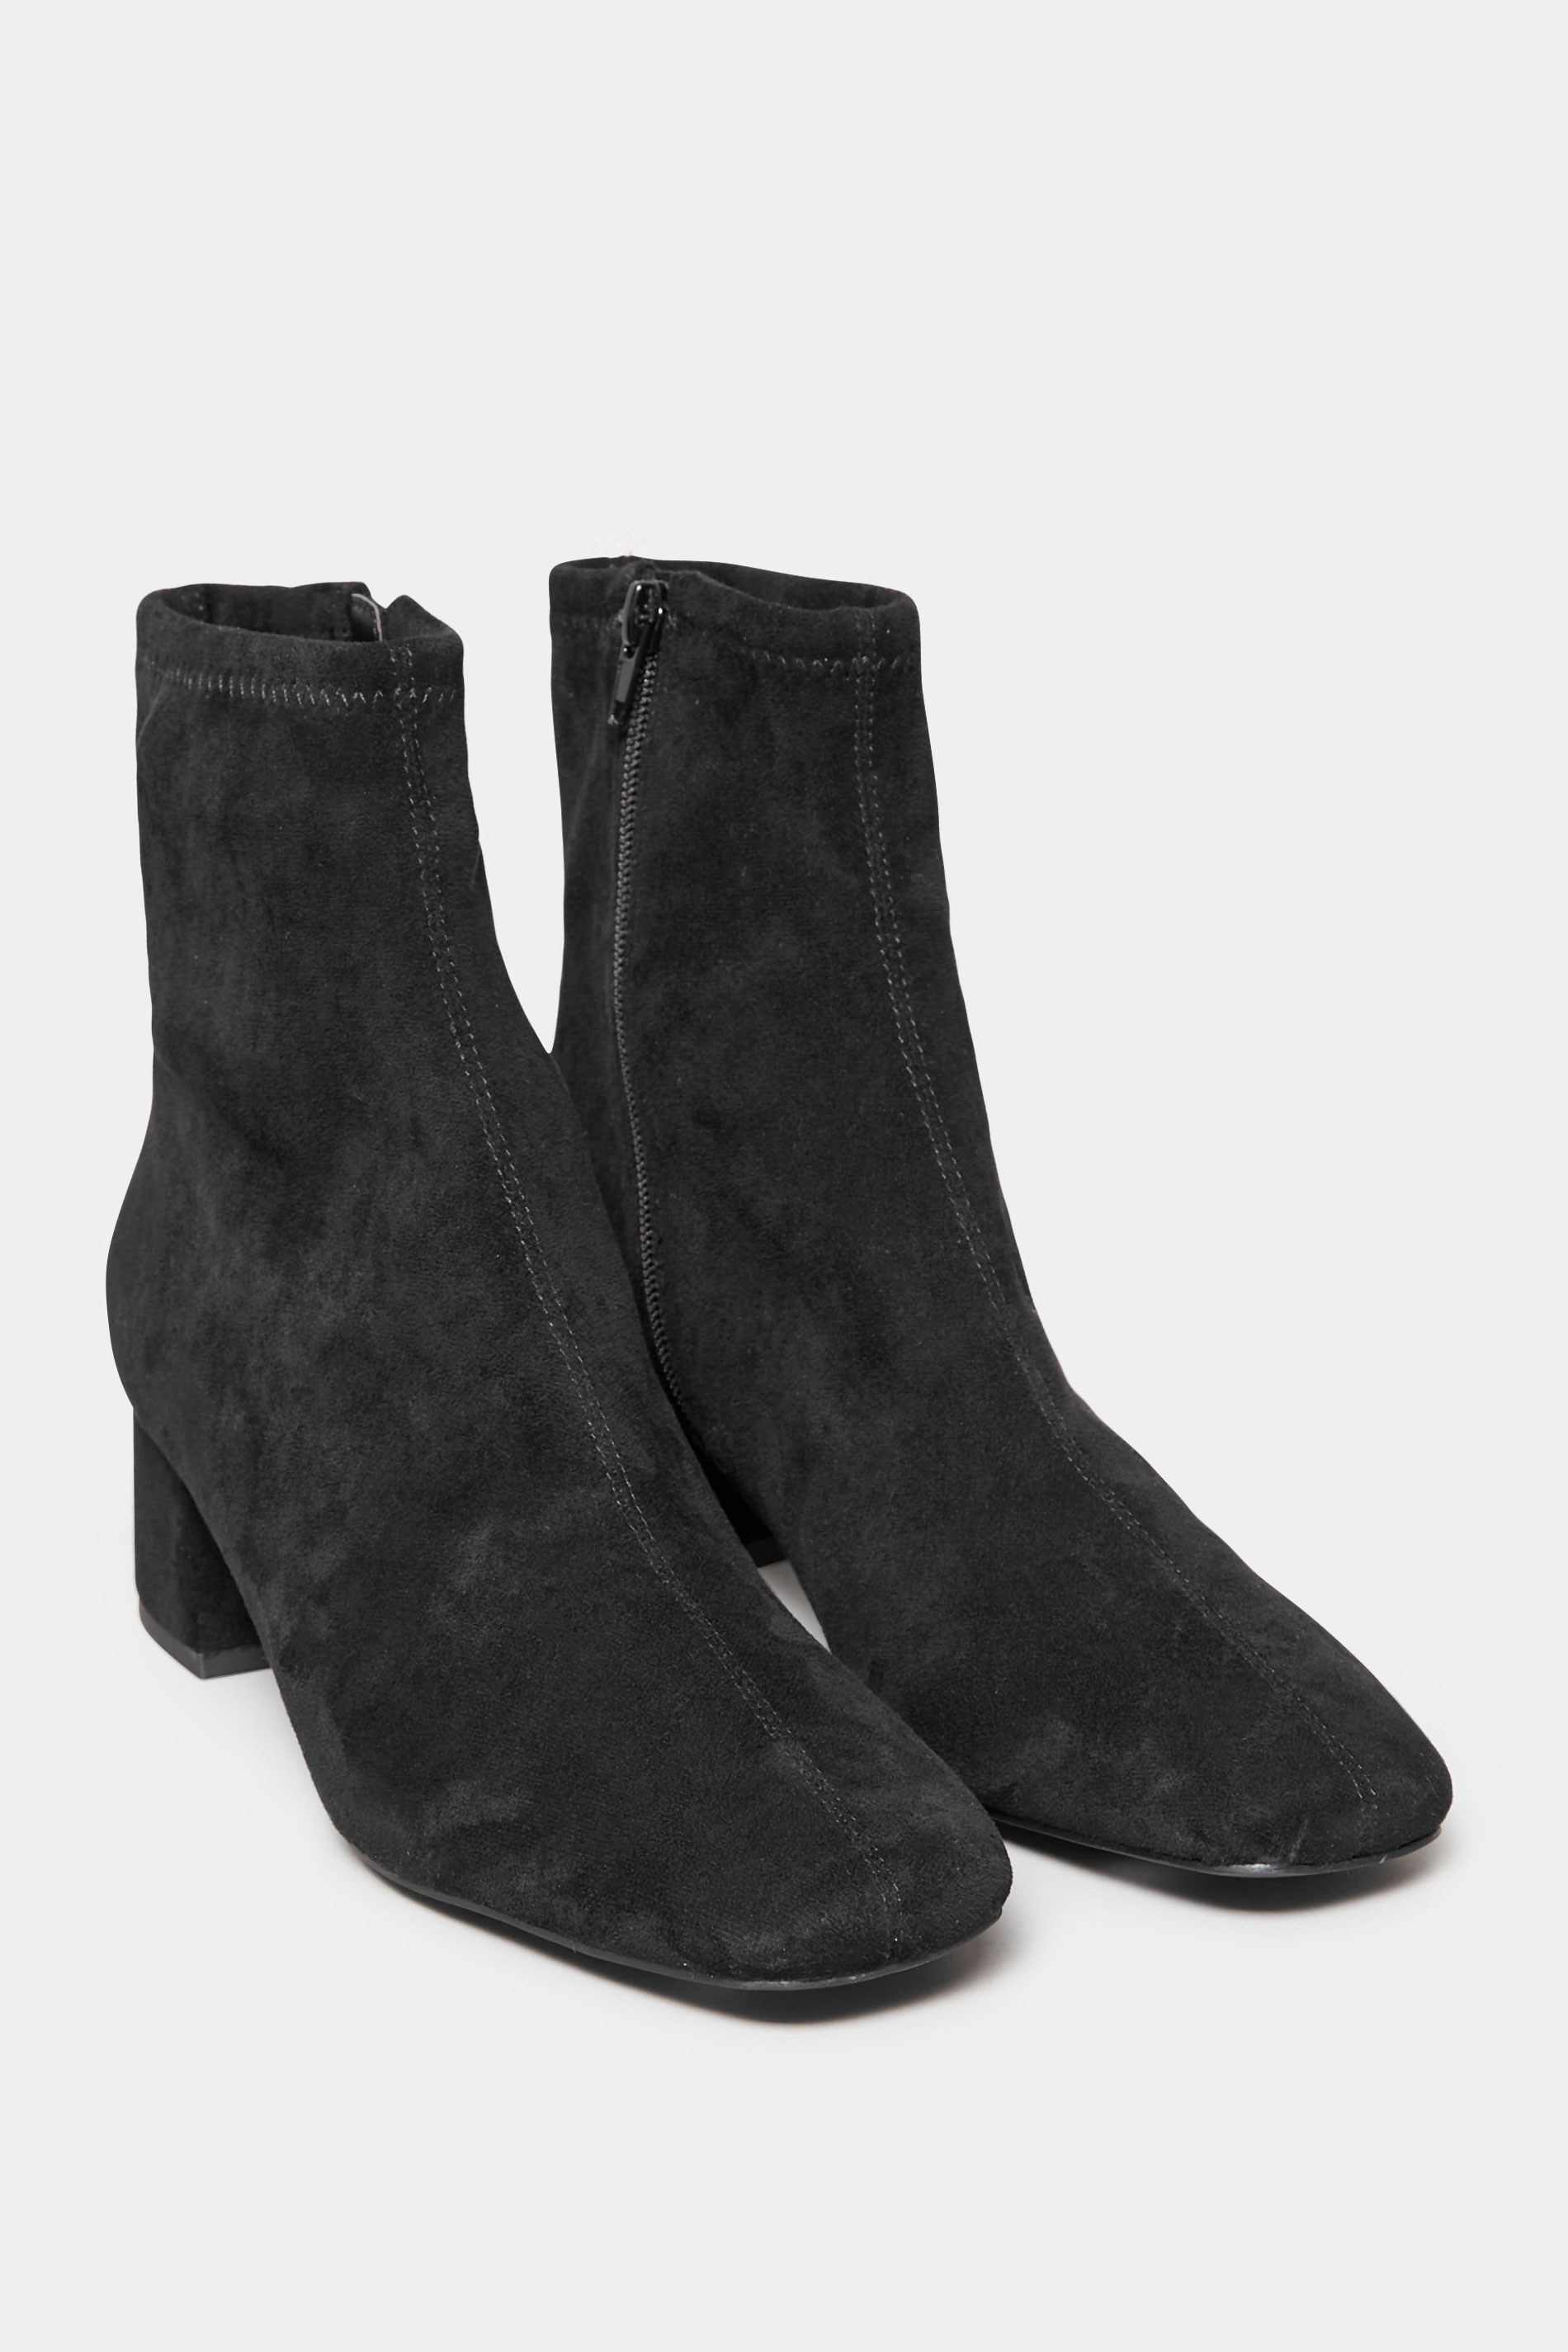 LTS Black Suede Block Heel Boots In Standard Fit | Long Tall Sally 2